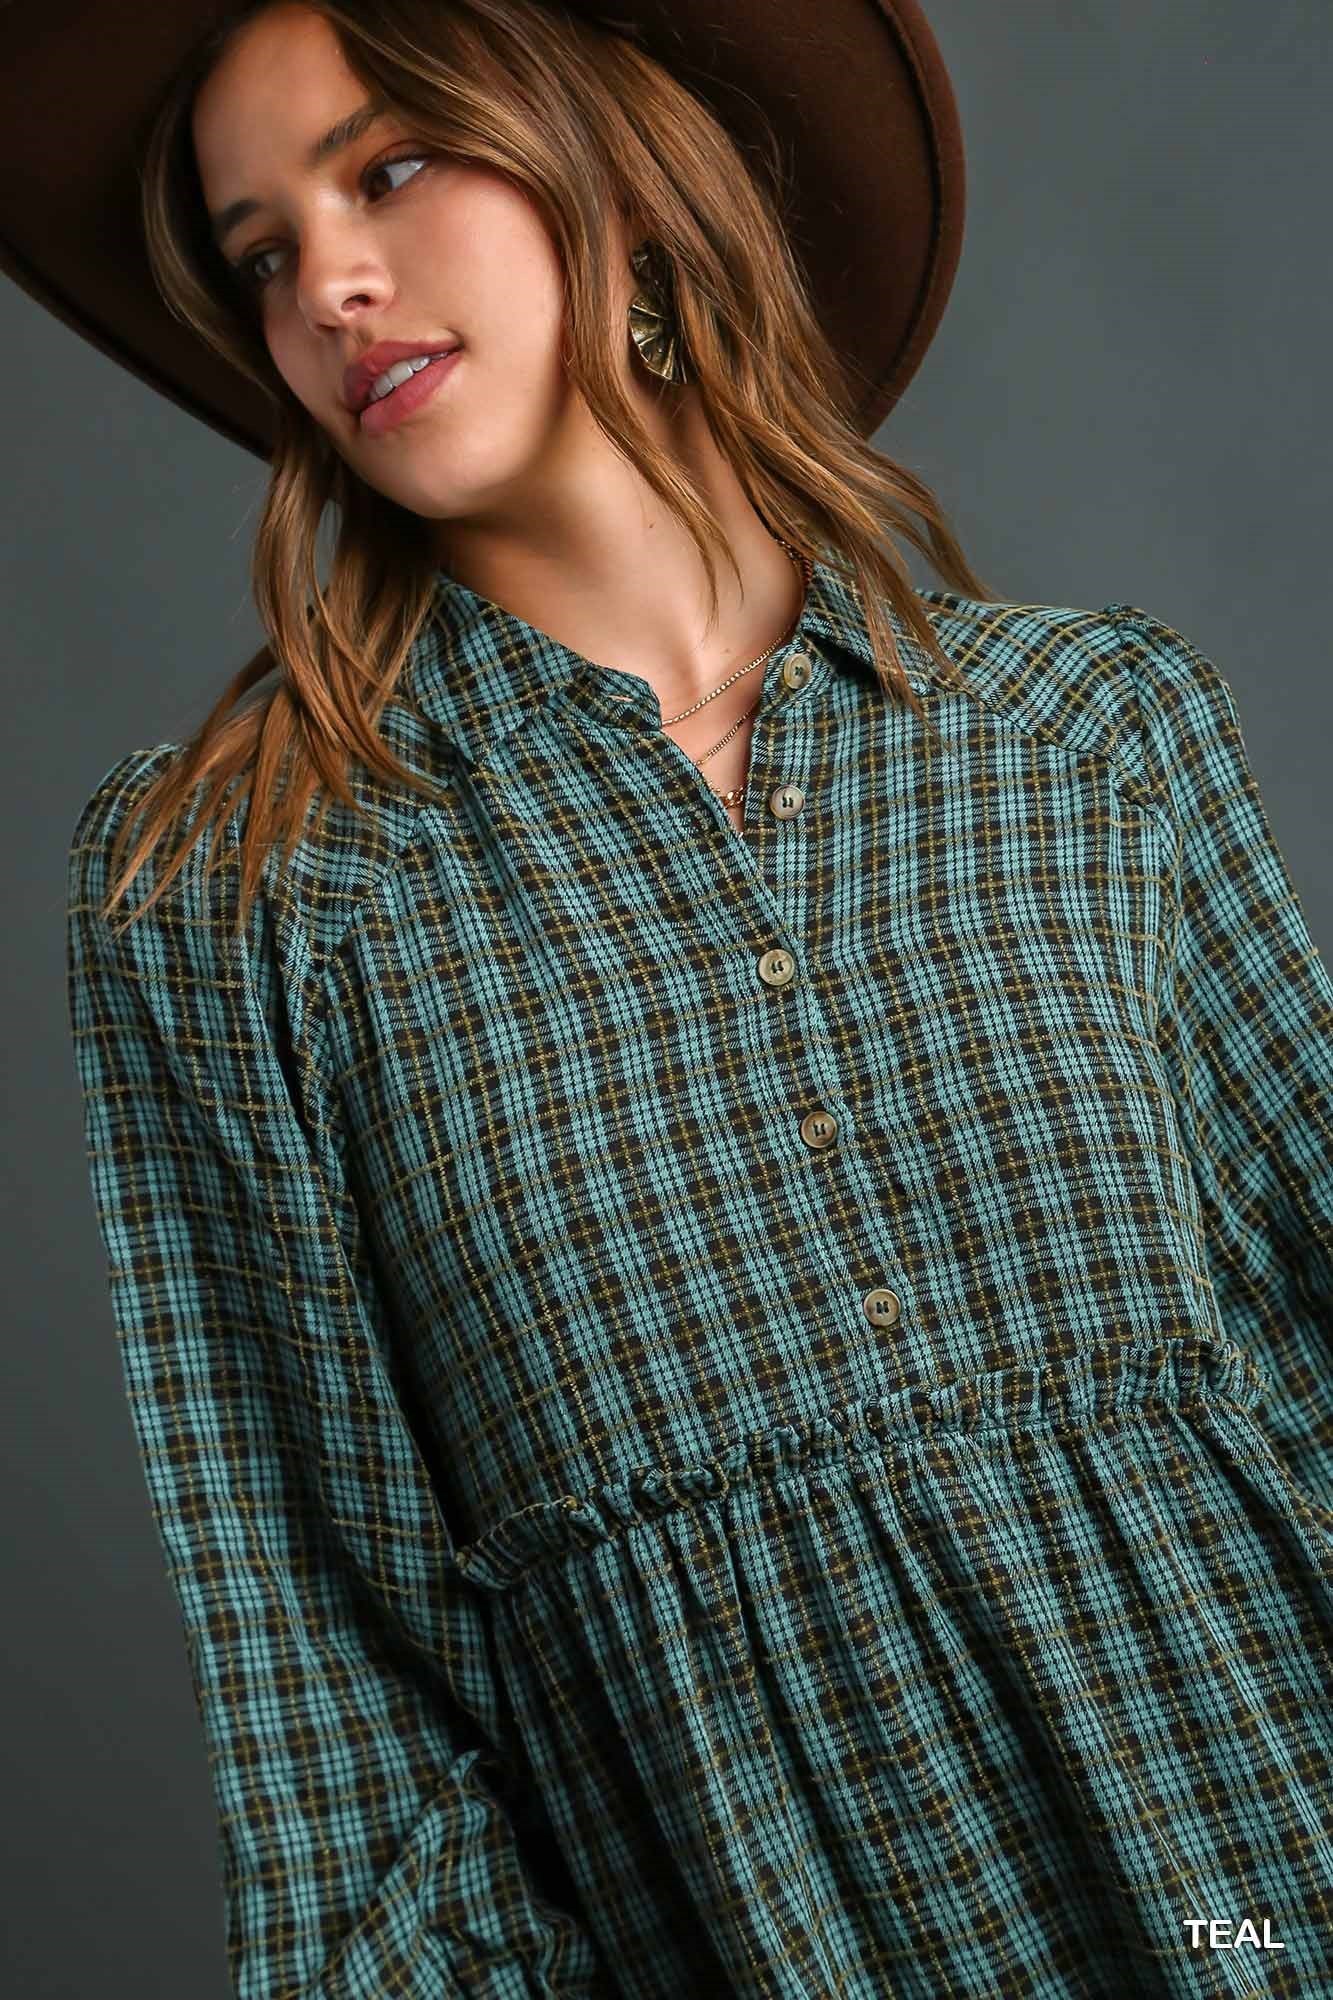 Teal Plaid Button Up Collared Dress